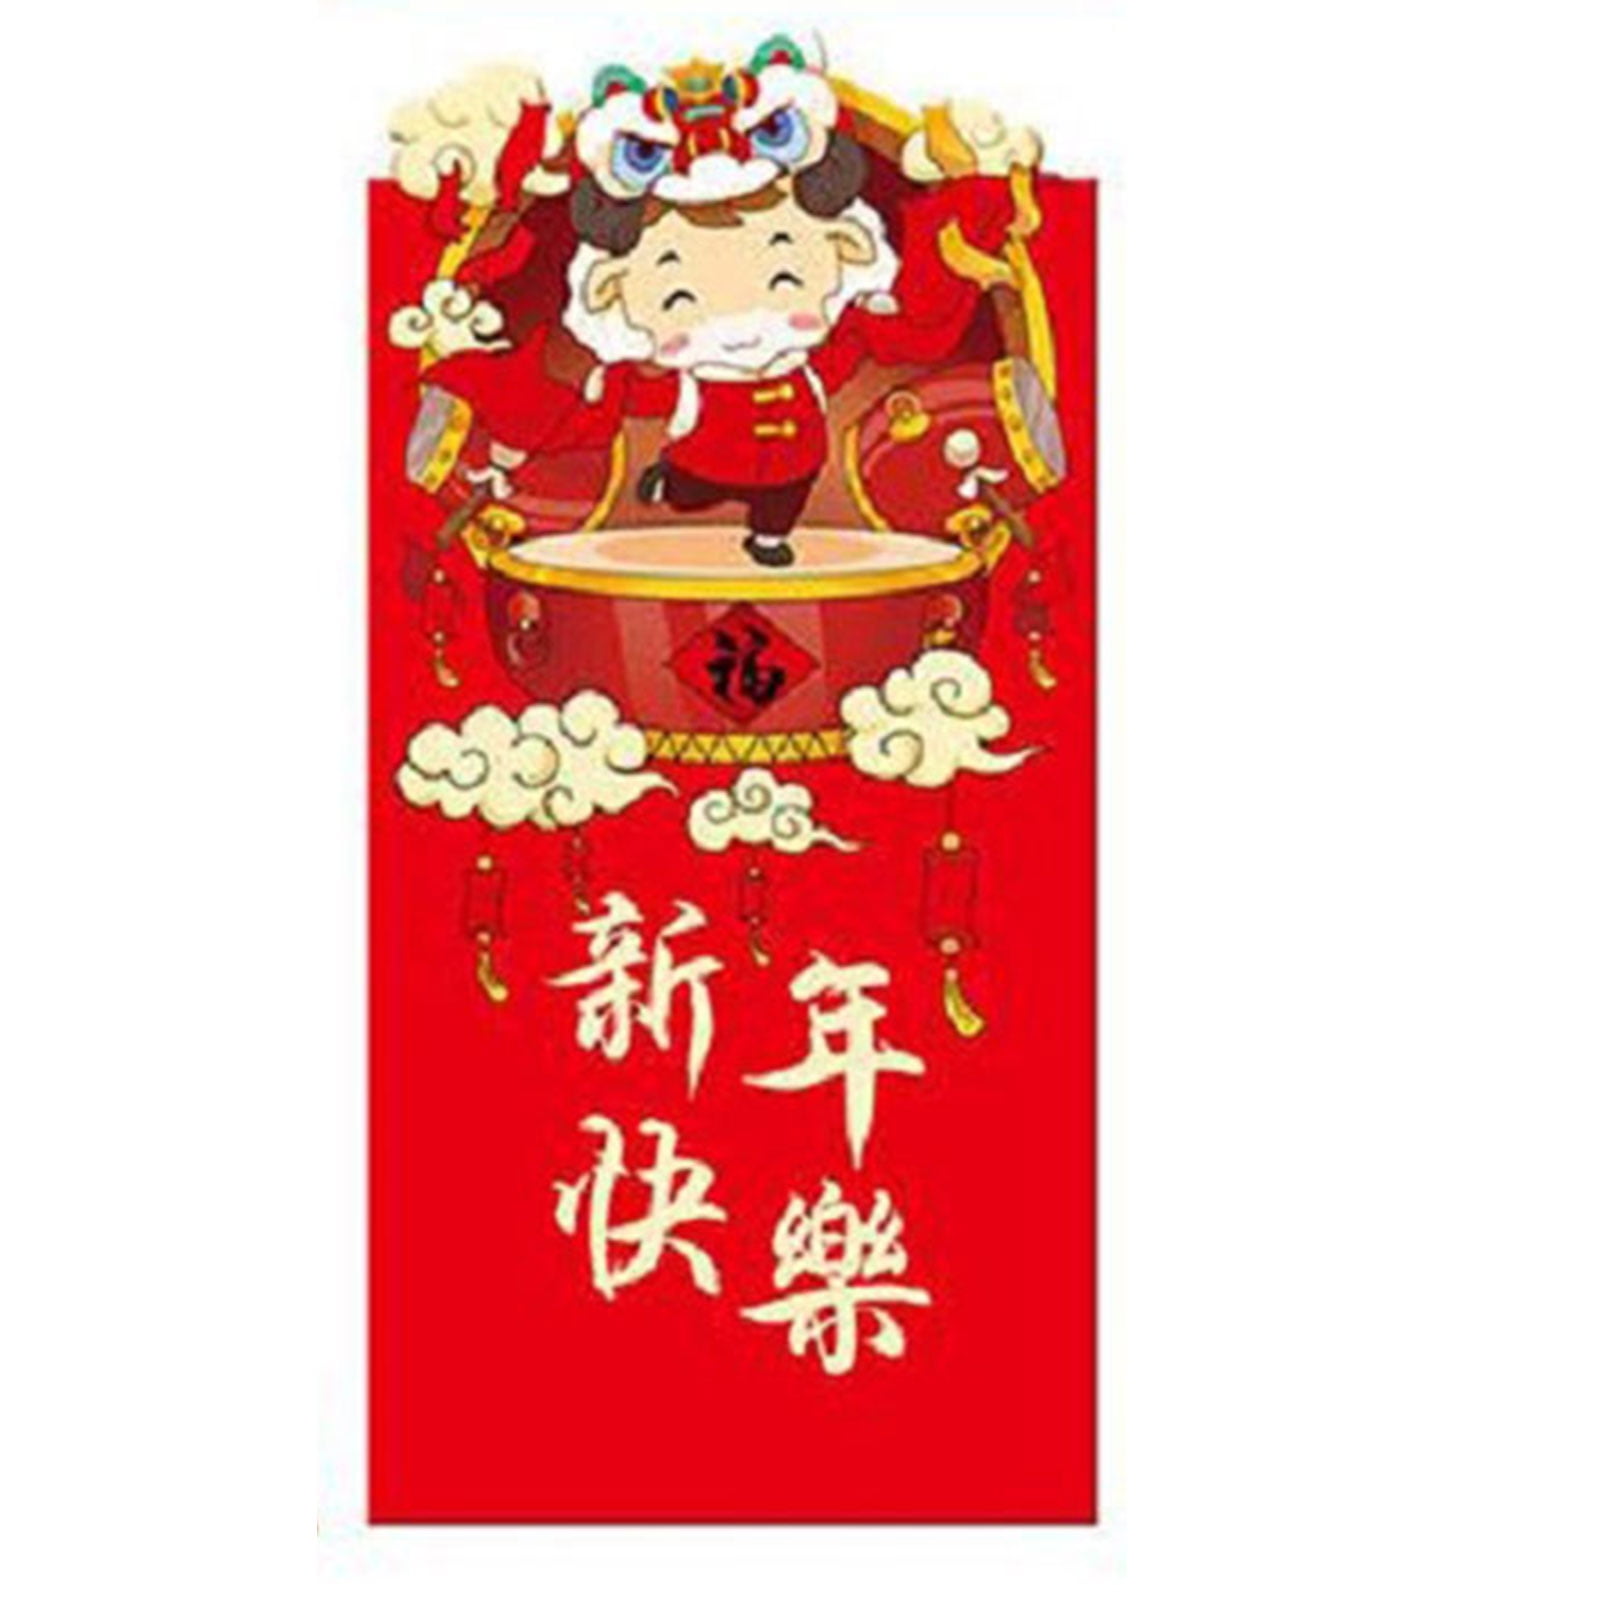 80pcs Chinese New Year Red Envelope Mini 2021 Zodiac OX Red Packets Cartoon  Chinese New Year Lucky H…See more 80pcs Chinese New Year Red Envelope Mini